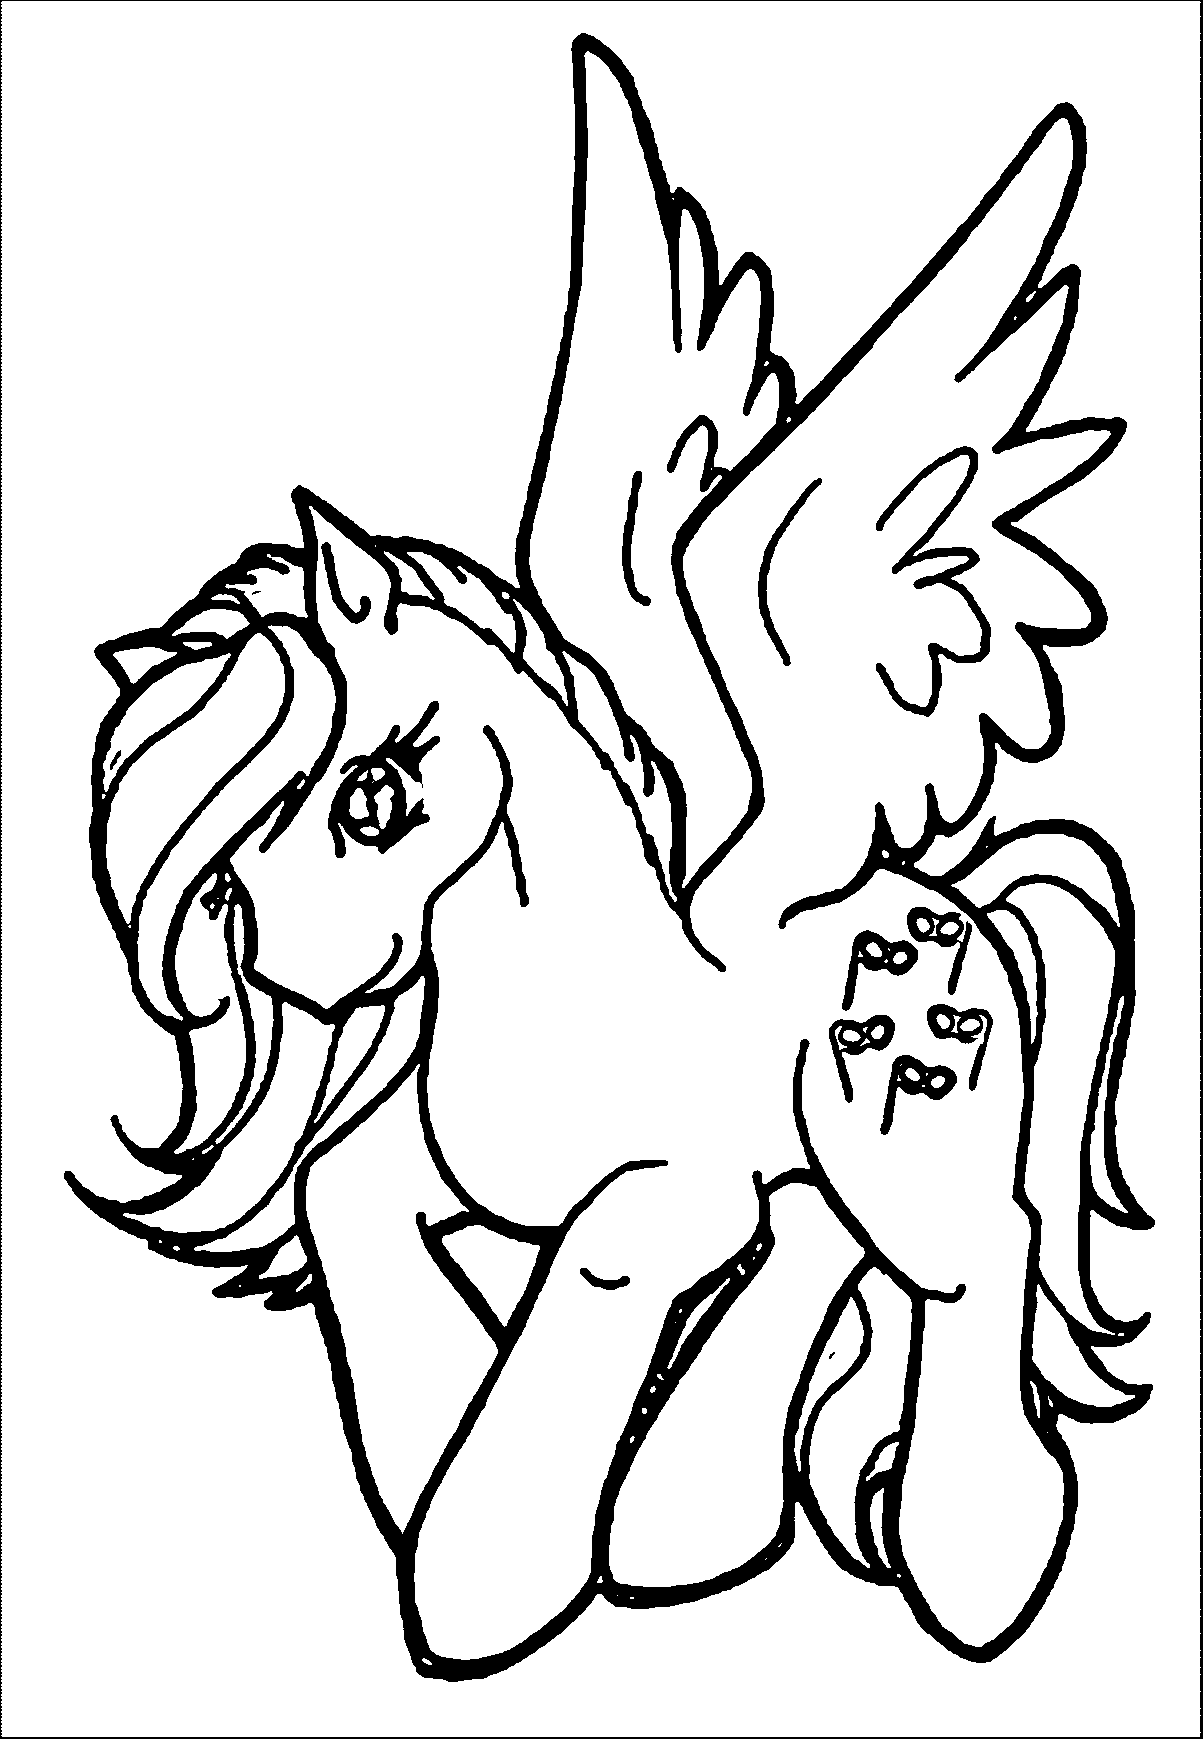 My little pony clip art black and white